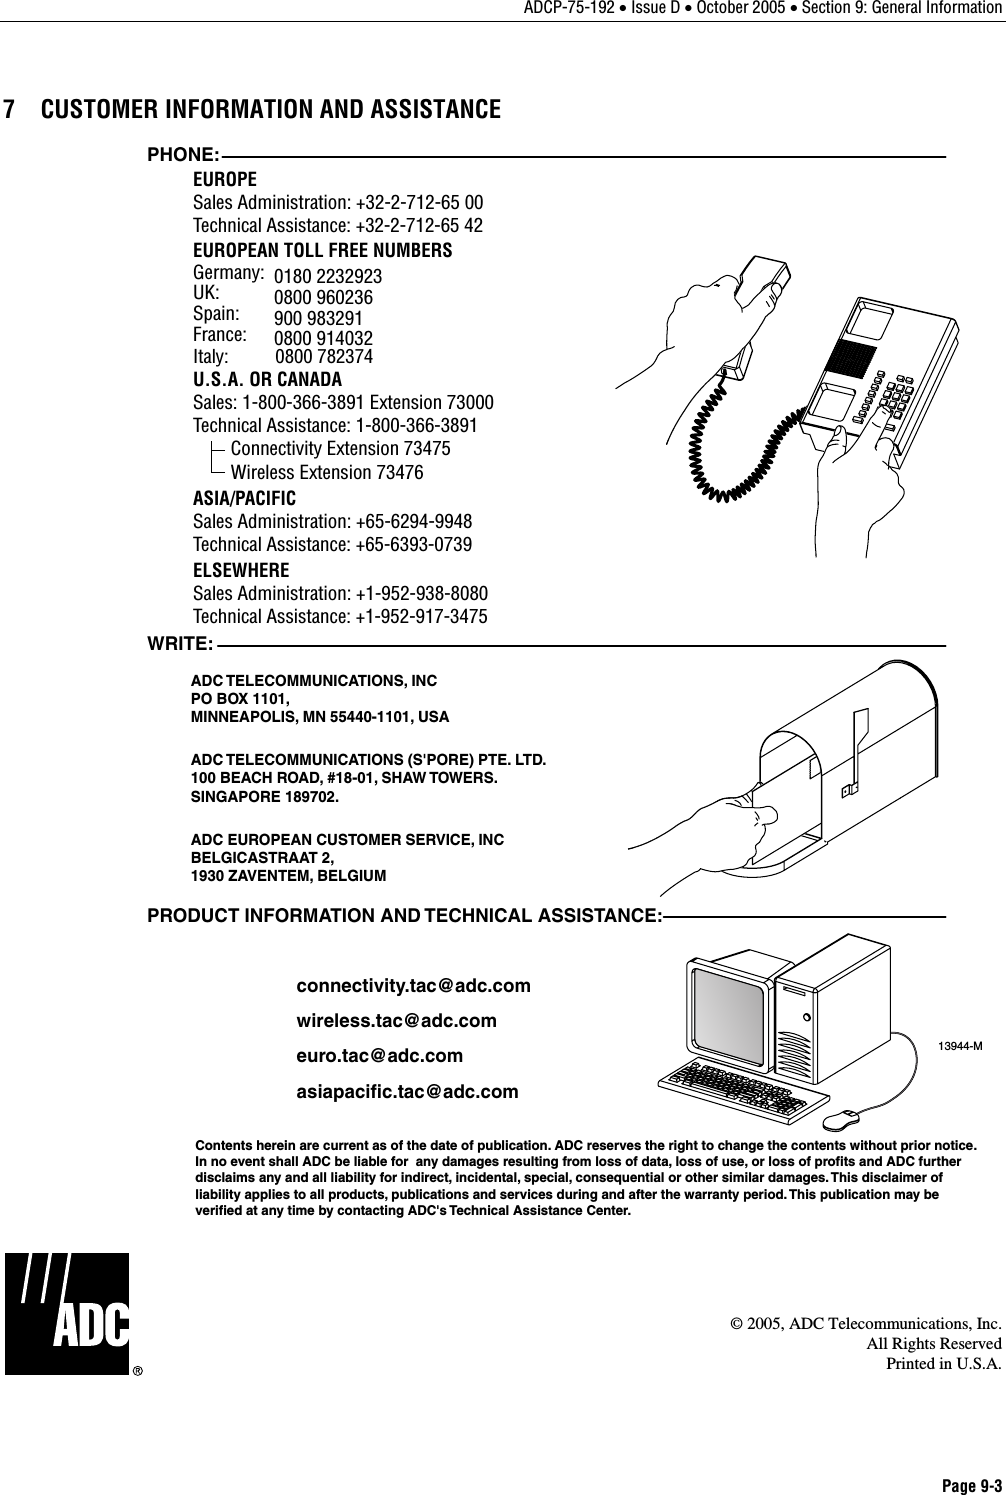 ADCP-75-192 • Issue D • October 2005 • Section 9: General Information Page 9-3  7  CUSTOMER INFORMATION AND ASSISTANCE 13944-MWRITE:ADC TELECOMMUNICATIONS, INCPO BOX 1101,MINNEAPOLIS, MN 55440-1101, USAADC TELECOMMUNICATIONS (S&apos;PORE) PTE. LTD.100 BEACH ROAD, #18-01, SHAW TOWERS.SINGAPORE 189702.ADC EUROPEAN CUSTOMER SERVICE, INCBELGICASTRAAT 2,1930 ZAVENTEM, BELGIUMPHONE:EUROPESales Administration: +32-2-712-65 00Technical Assistance: +32-2-712-65 42EUROPEAN TOLL FREE NUMBERSUK: 0800 960236Spain: 900 983291France: 0800 914032Germany: 0180 2232923U.S.A. OR CANADASales: 1-800-366-3891 Extension 73000Technical Assistance: 1-800-366-3891        Connectivity Extension 73475        Wireless Extension 73476ASIA/PACIFICSales Administration: +65-6294-9948Technical Assistance: +65-6393-0739ELSEWHERESales Administration: +1-952-938-8080Technical Assistance: +1-952-917-3475Italy:          0800 782374PRODUCT INFORMATION AND TECHNICAL ASSISTANCE:Contents herein are current as of the date of publication. ADC reserves the right to change the contents without prior notice.In no event shall ADC be liable for  any damages resulting from loss of data, loss of use, or loss of profits and ADC furtherdisclaims any and all liability for indirect, incidental, special, consequential or other similar damages. This disclaimer ofliability applies to all products, publications and services during and after the warranty period. This publication may beverified at any time by contacting ADC&apos;s Technical Assistance Center. euro.tac@adc.comasiapacific.tac@adc.comwireless.tac@adc.comconnectivity.tac@adc.com  © 2005, ADC Telecommunications, Inc.All Rights ReservedPrinted in U.S.A. 